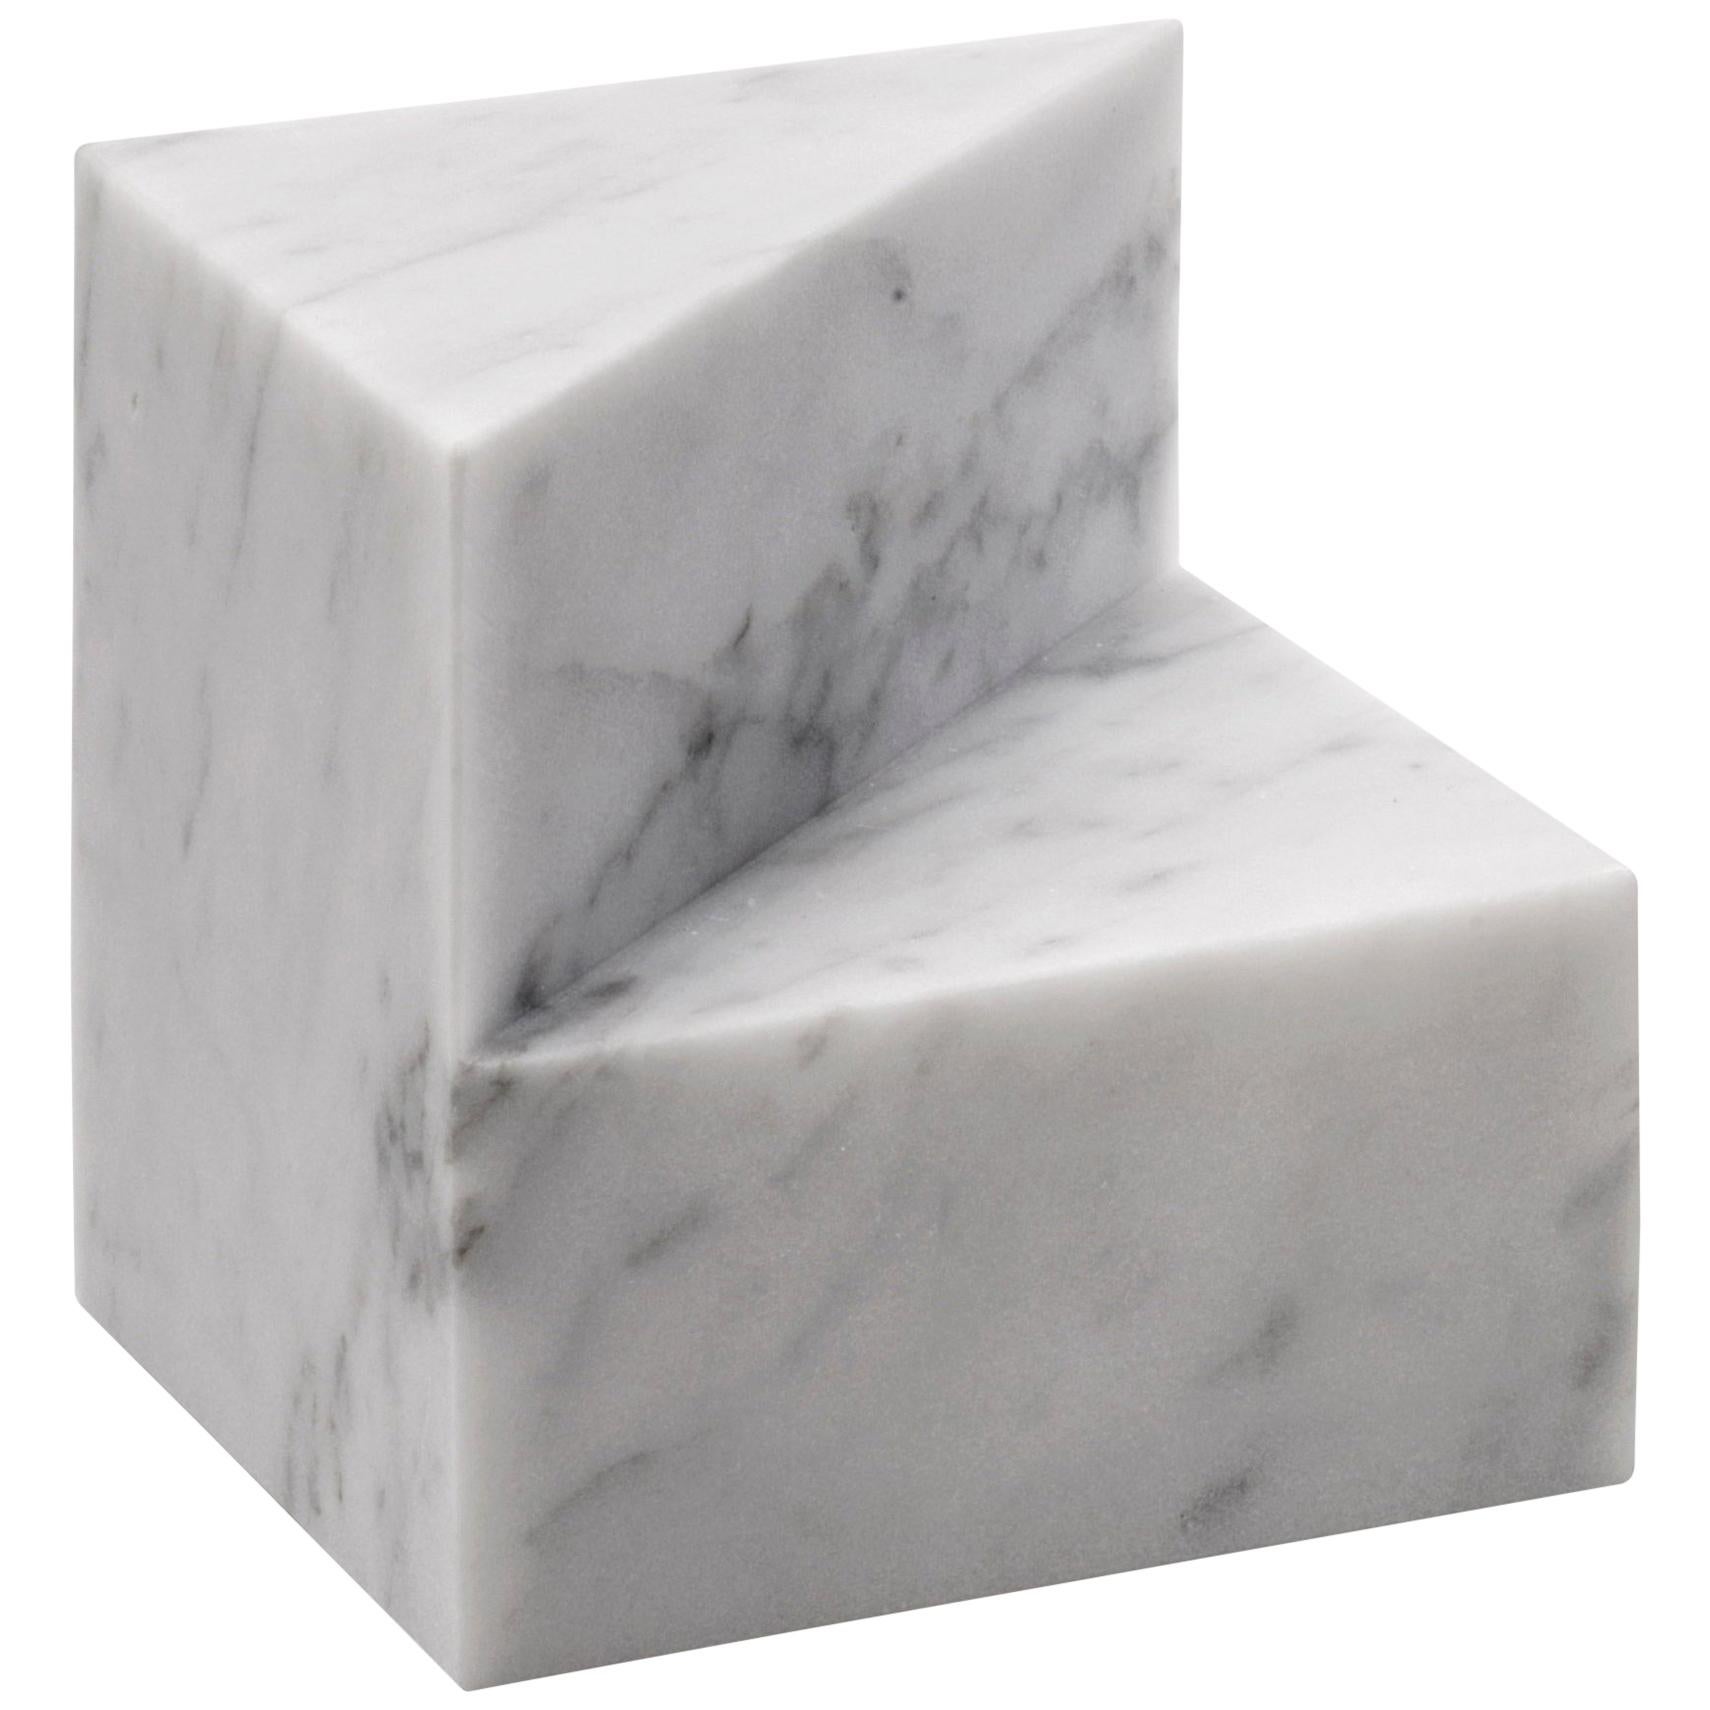 Salvatori Kilos Cube Paperweight in Bianco Carrara Marble by Elisa Ossino For Sale